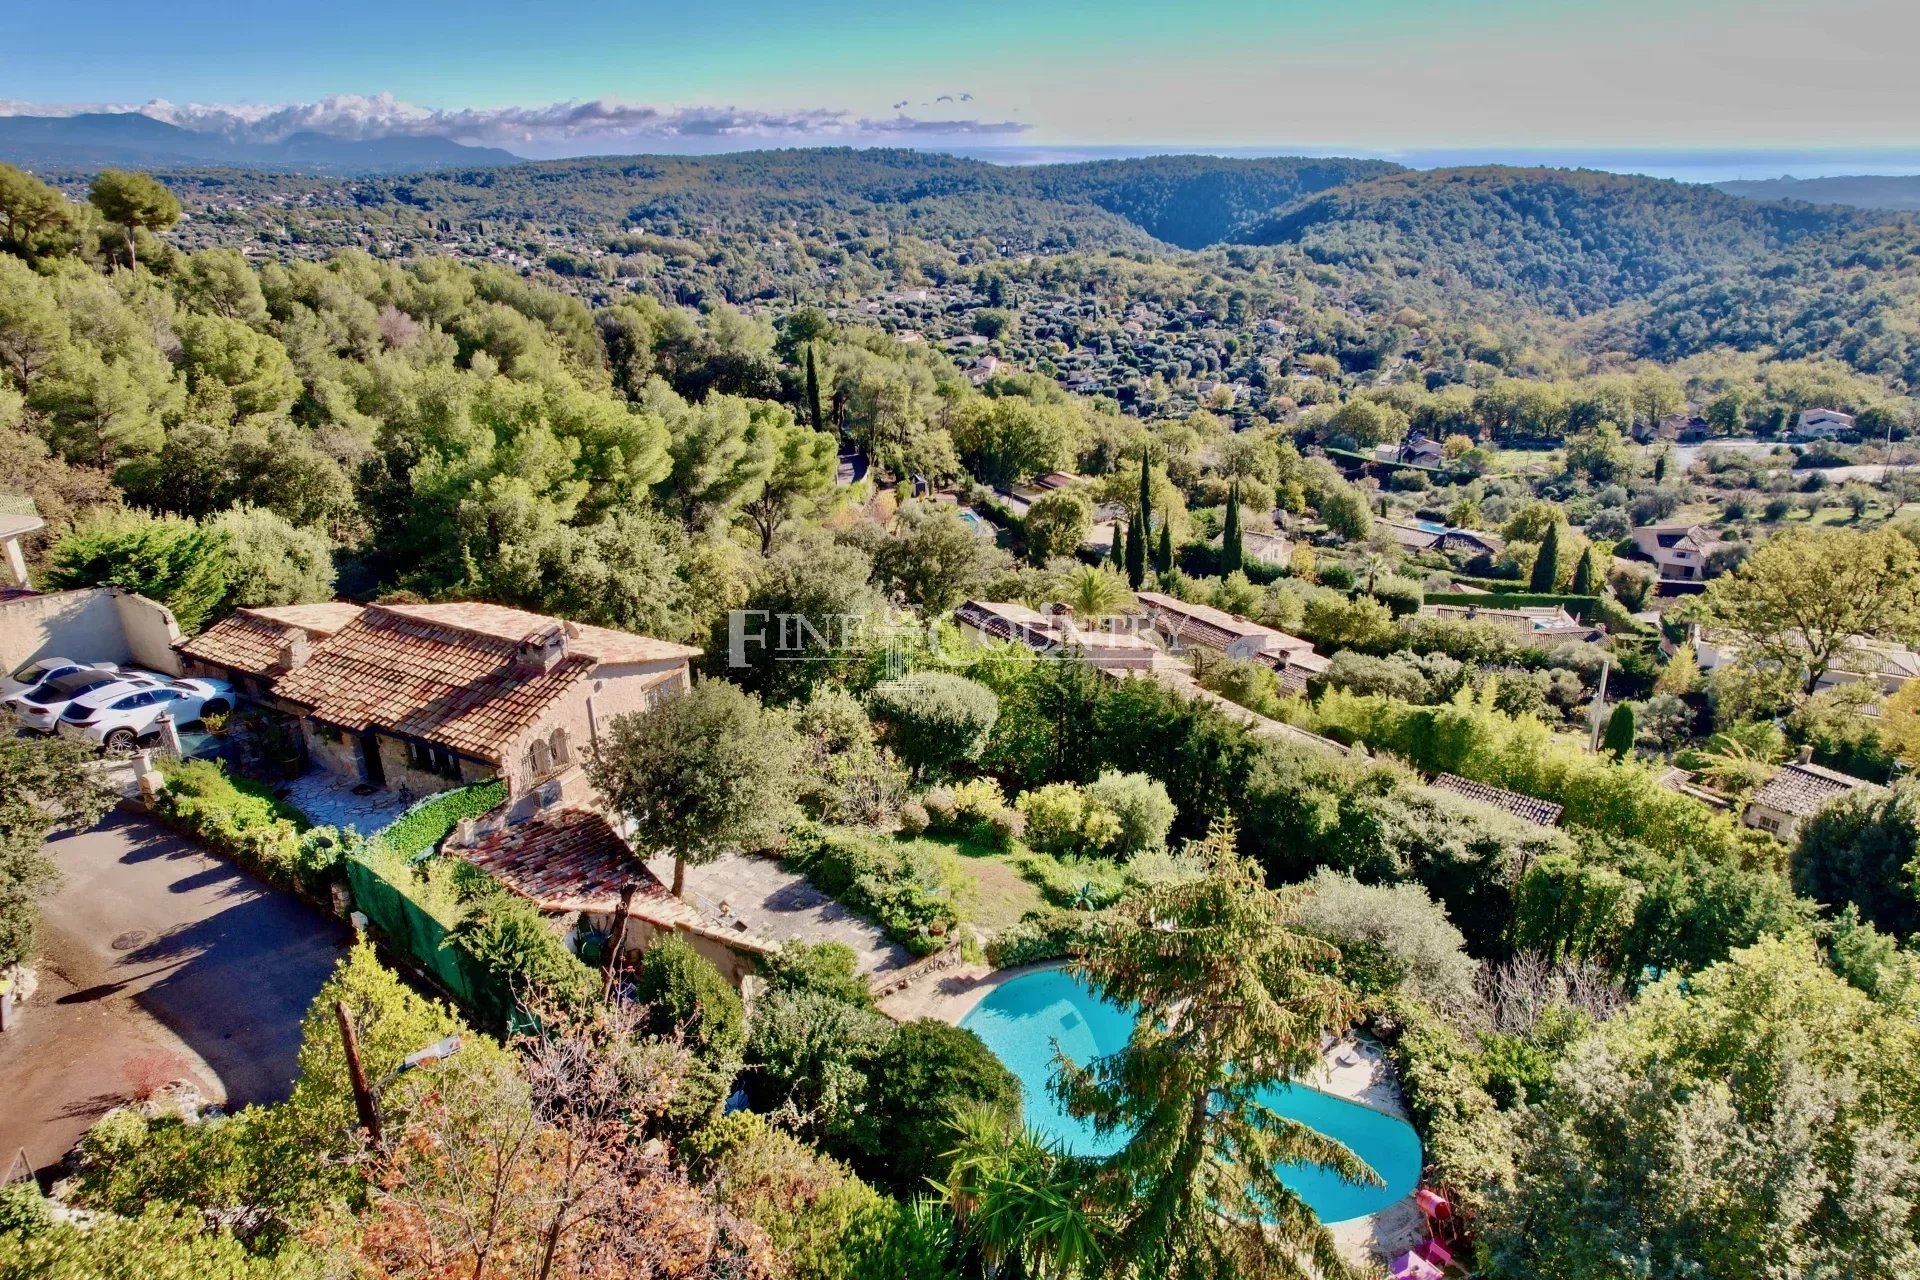 Photo of House for Sale in Tourrettes sur Loup - French Provencal Charm